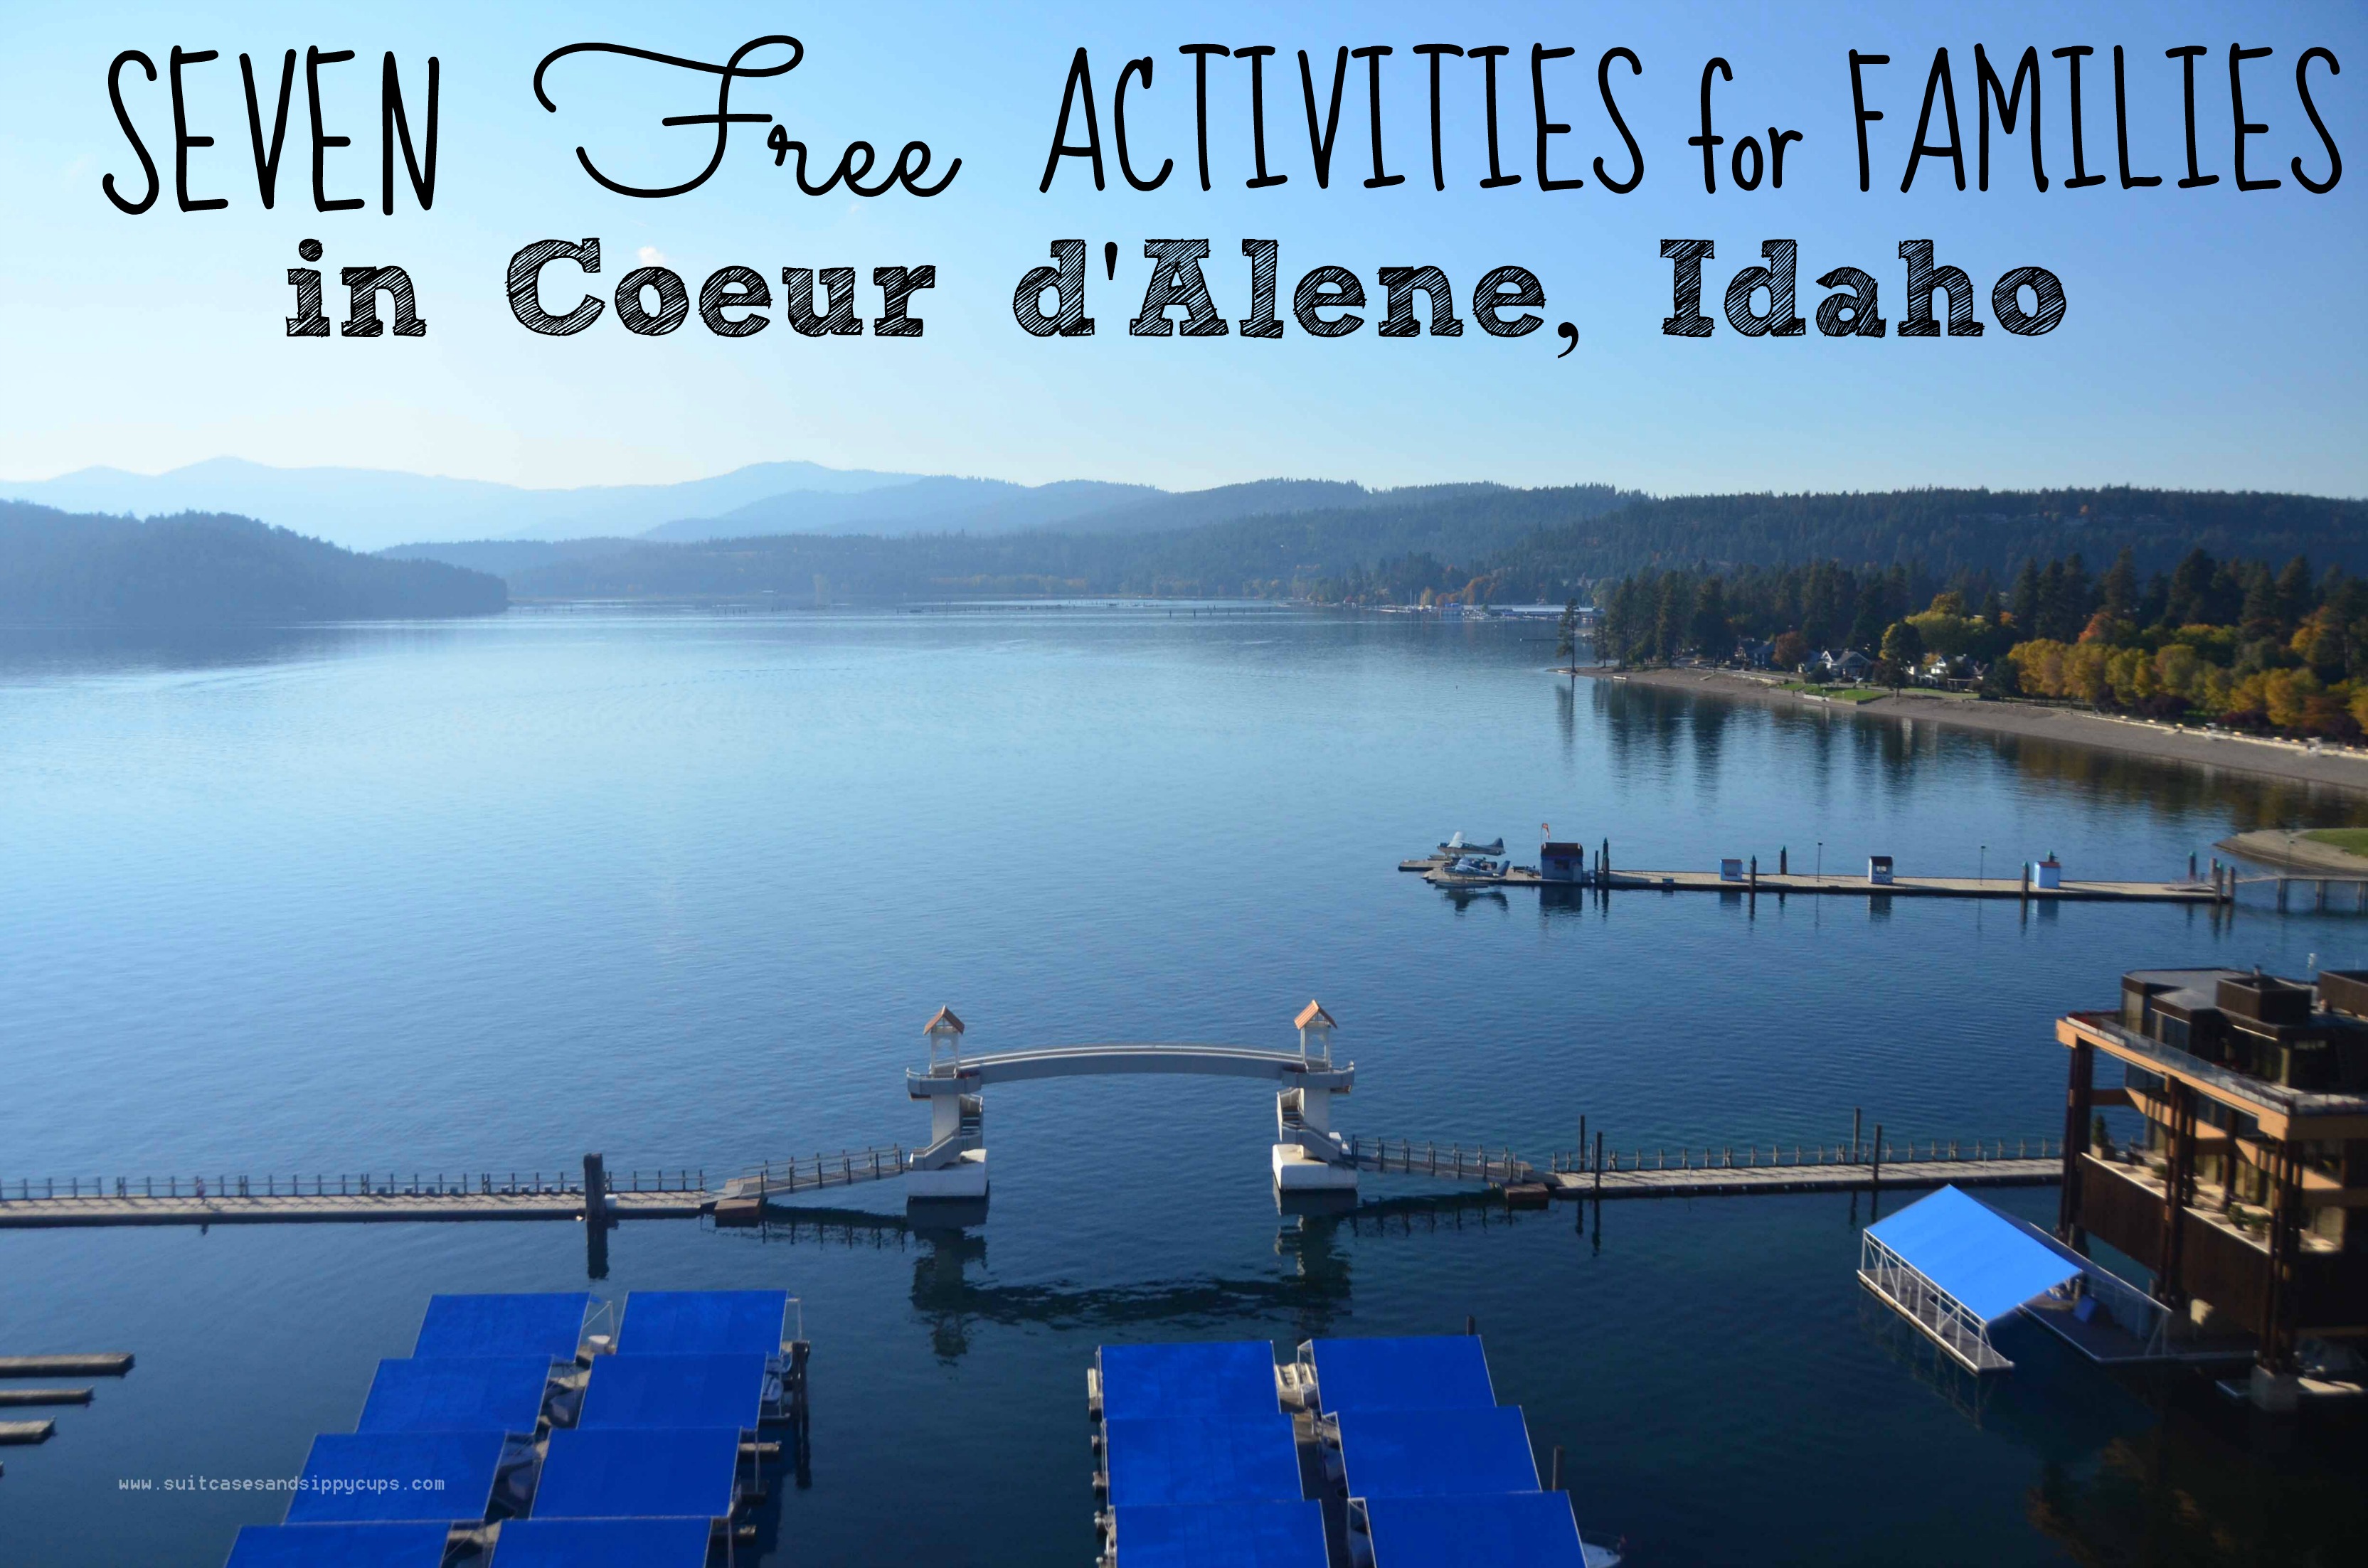 Seven Free Things to do in Coeur d’Alene, Idaho: Travel Tips Tuesday